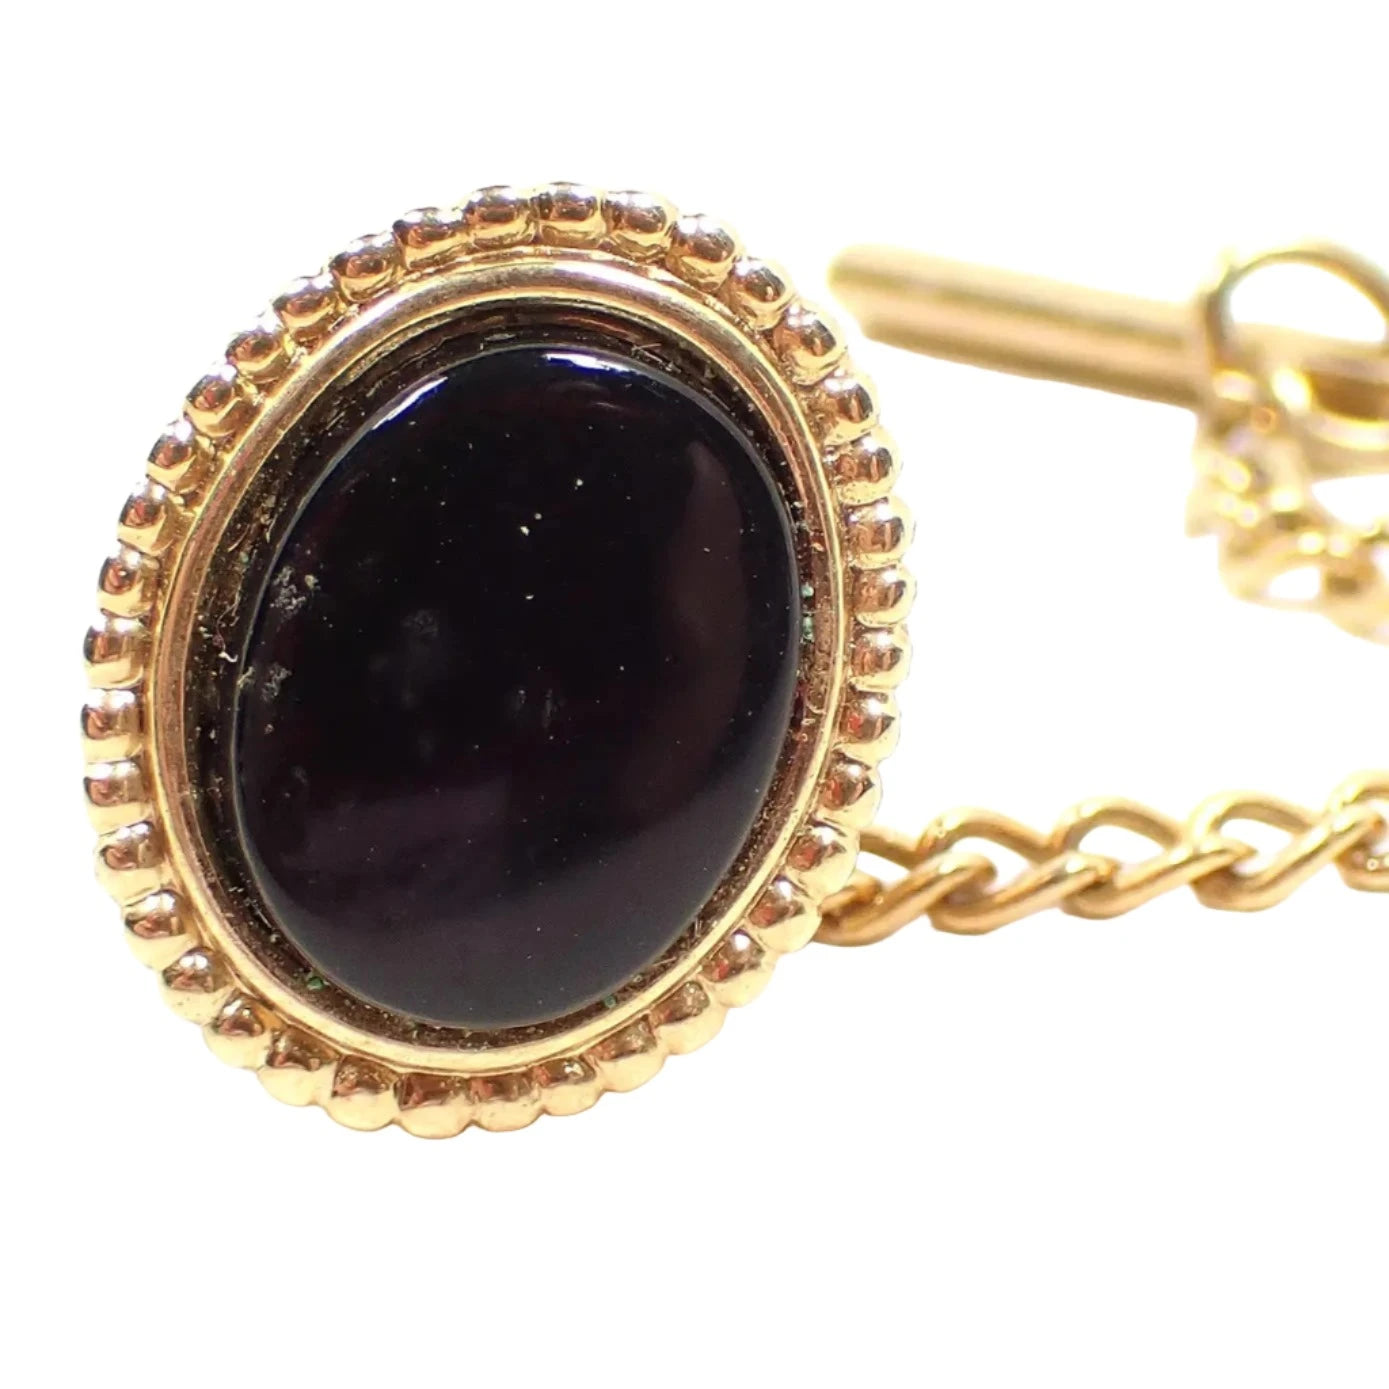 Front view of the Retro vintage Avon tie tack. The metal is gold tone in color and is oval in shape. The middle of the oval has a black glass cab. The outer edge has round dots all the way around it. From the back there is a chain with a bar at the end.